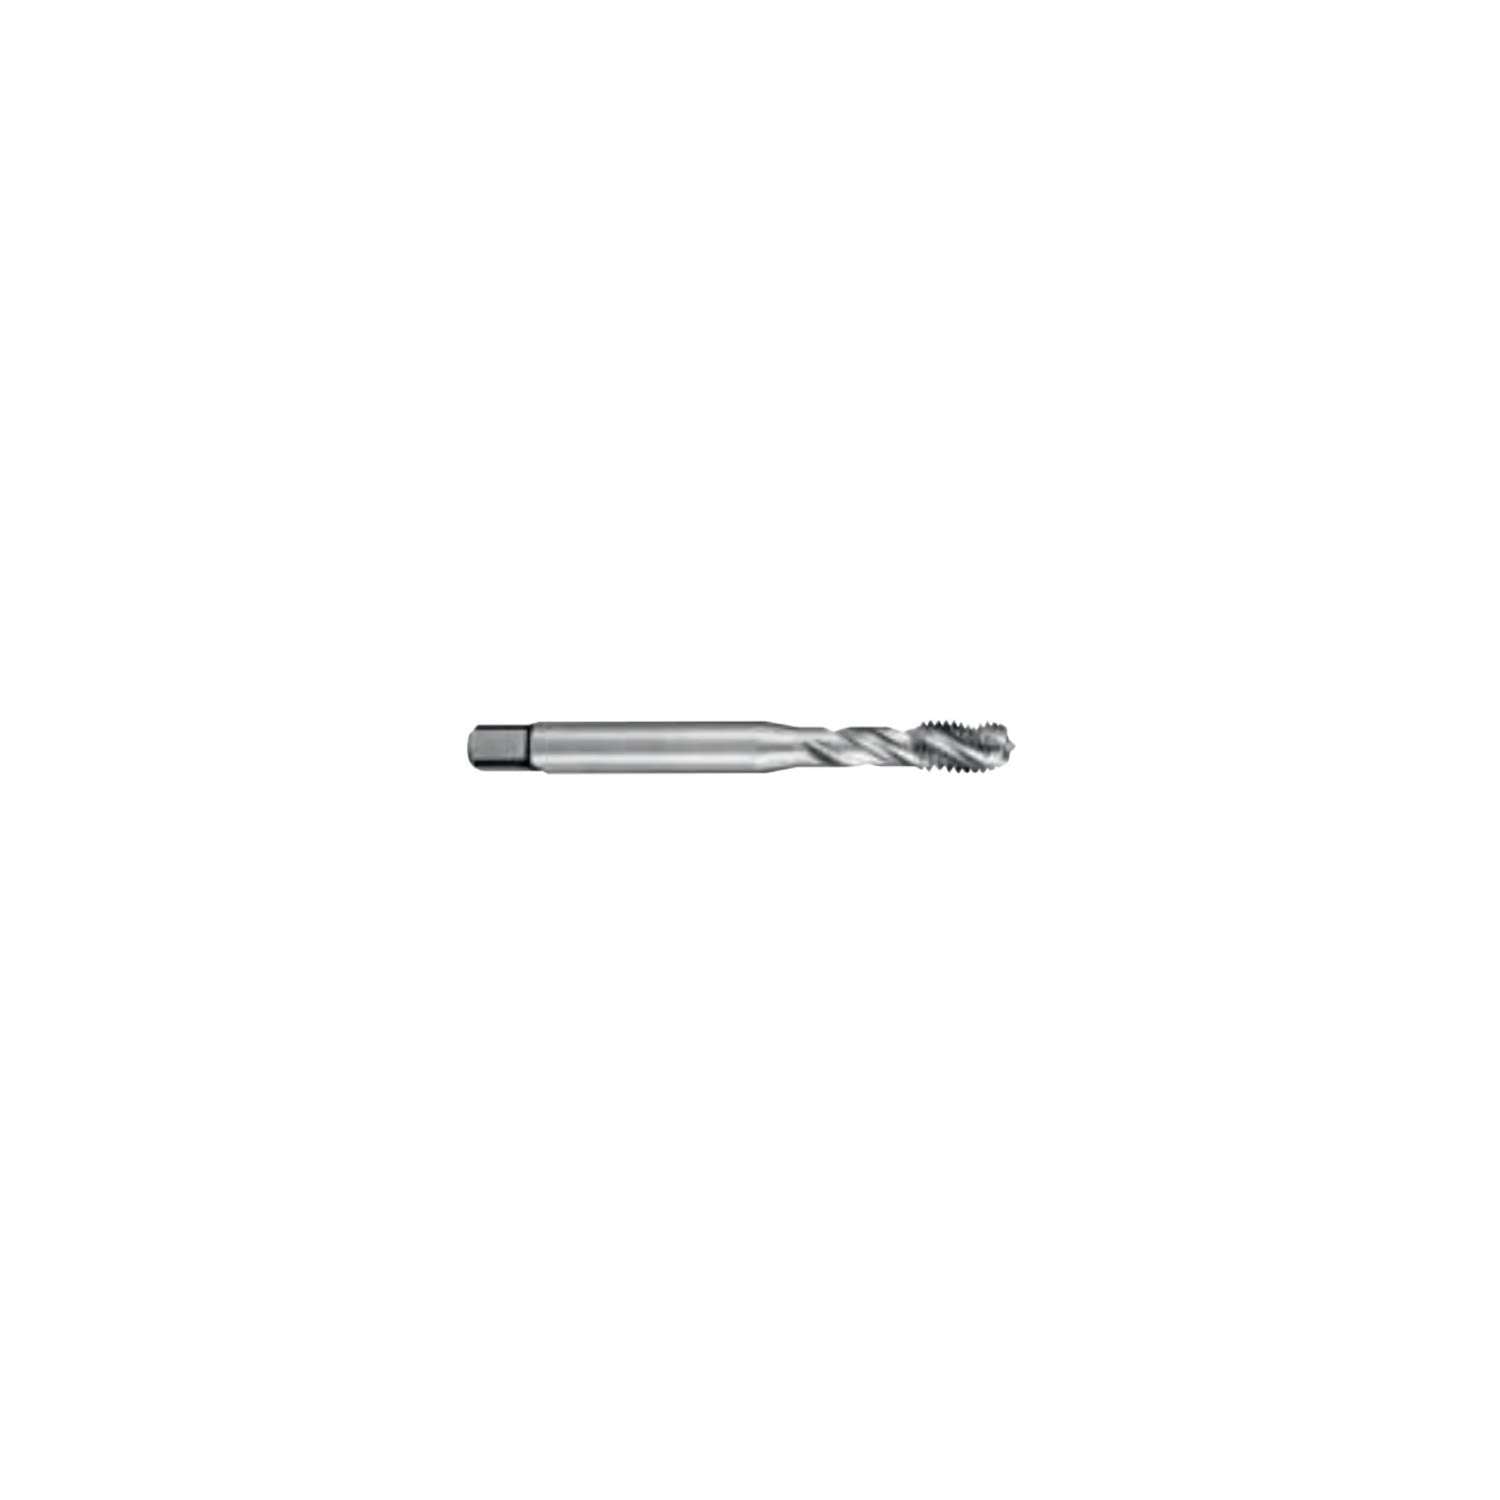 Machine tap 40 6G for general applications DIN 371 5 - ILIX